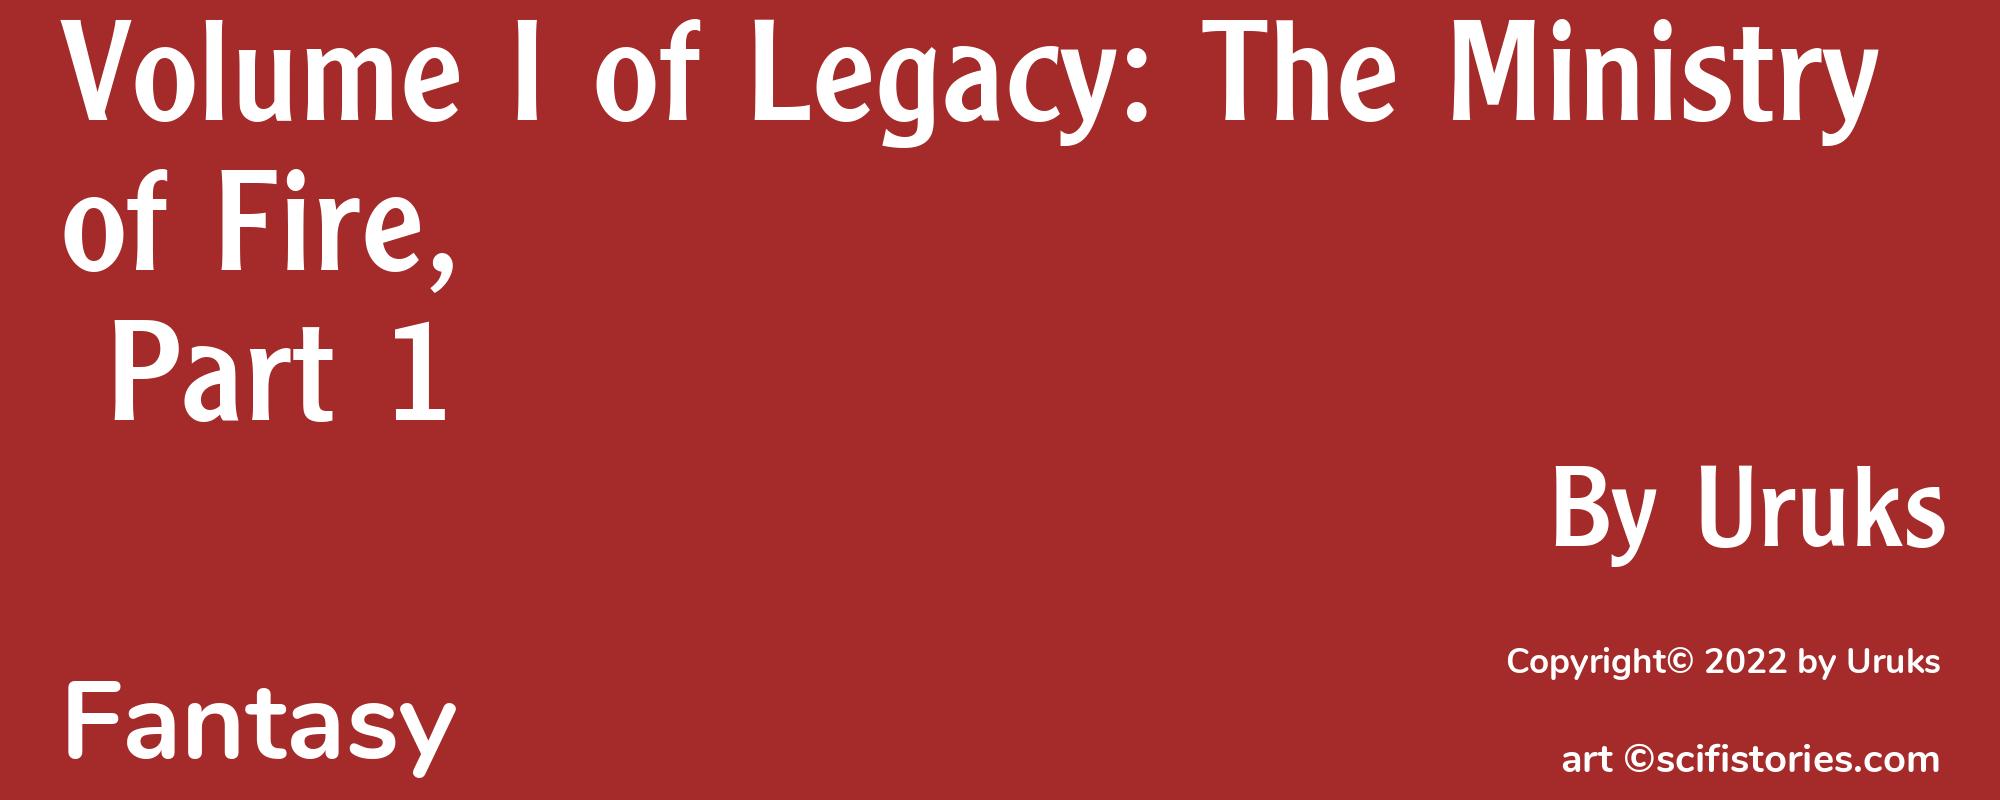 Volume I of Legacy: The Ministry of Fire, Part 1 - Cover